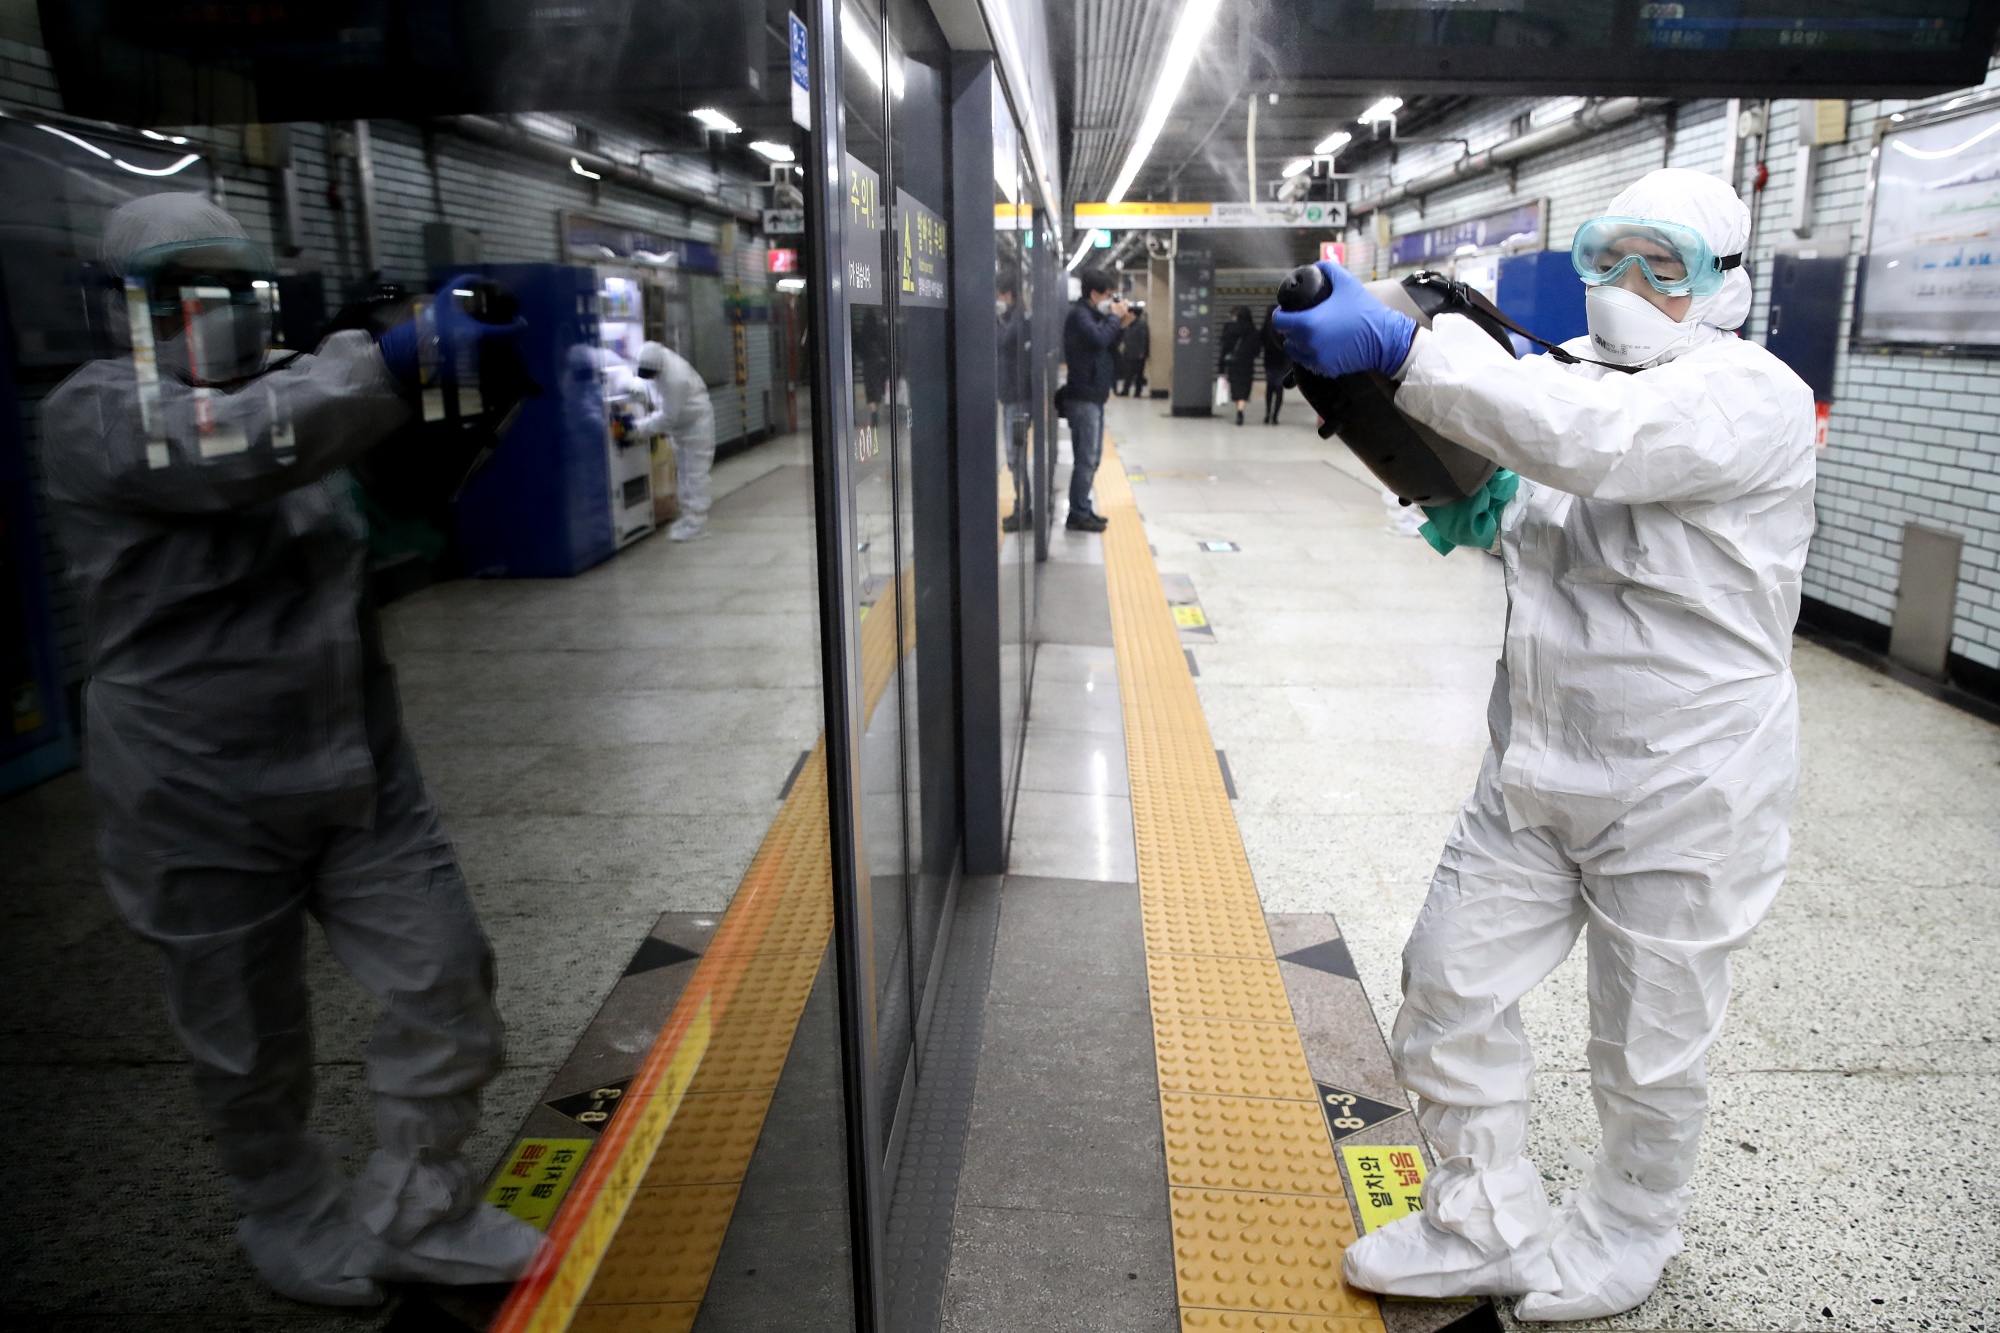 A health worker sprays&nbsp;disinfection at a rail station in&nbsp;Seoul, on Feb. 21.